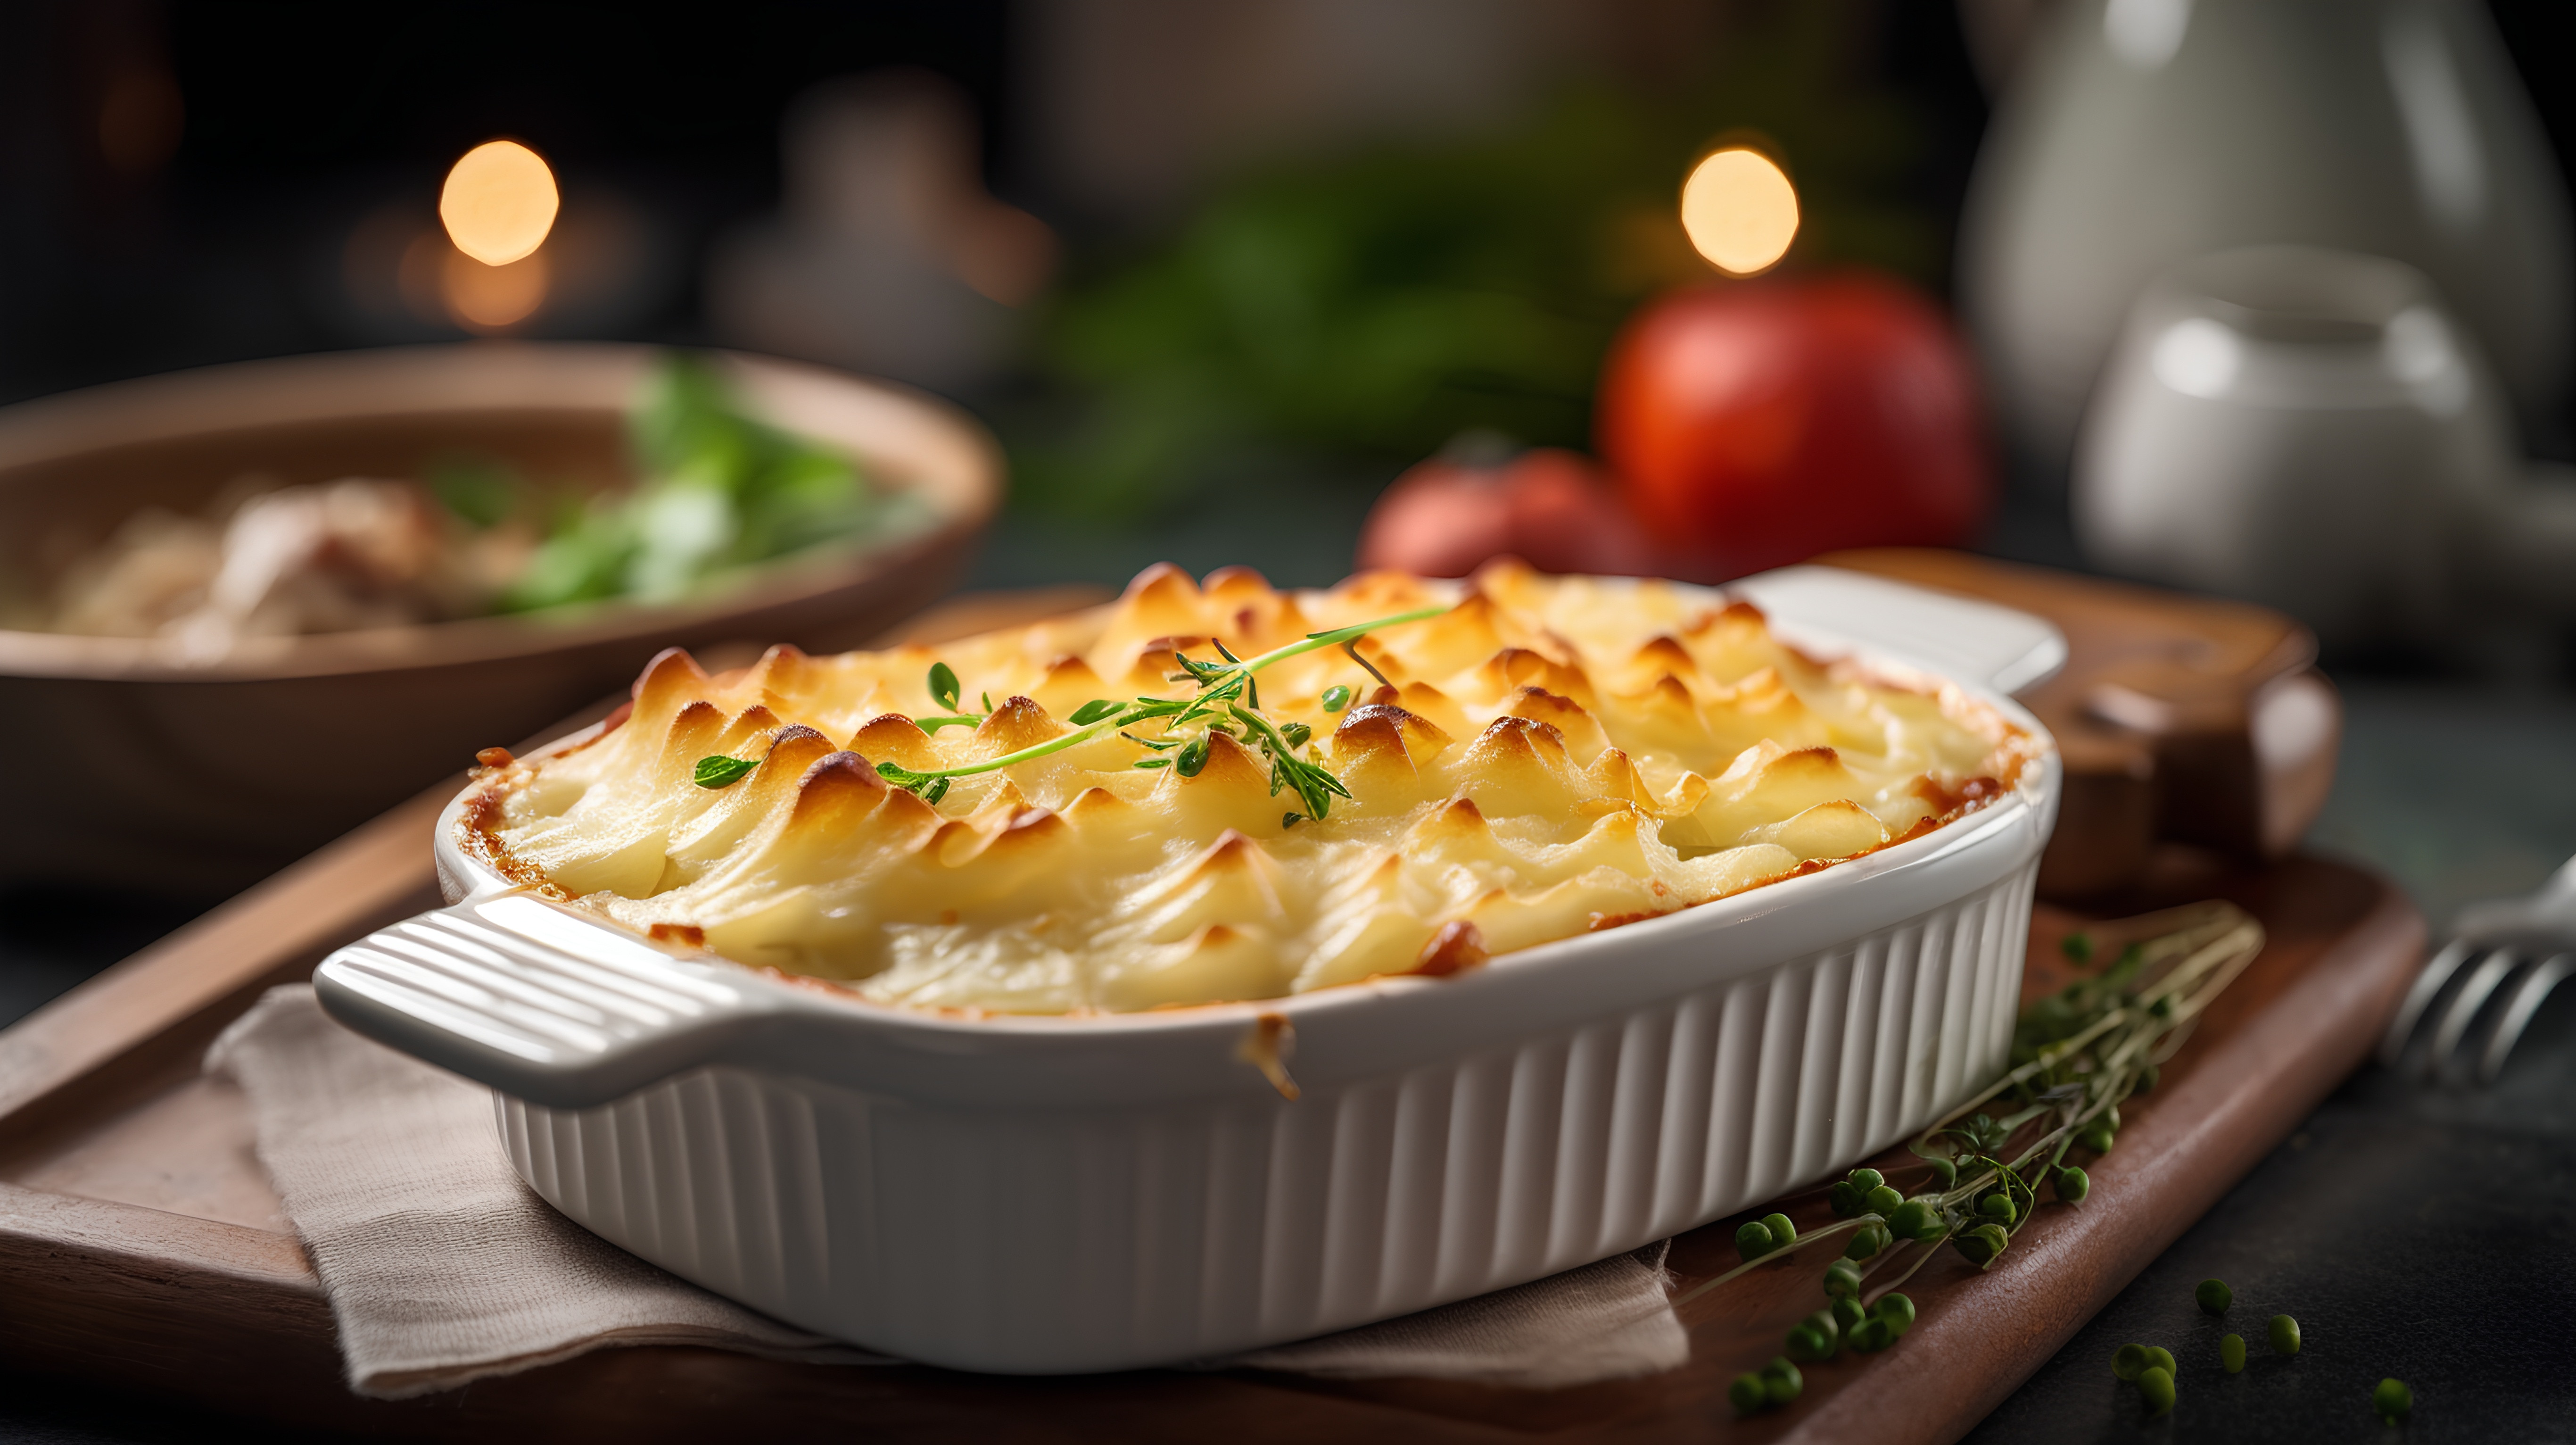 Baked potato casserole with cheese and herbs in baking dish